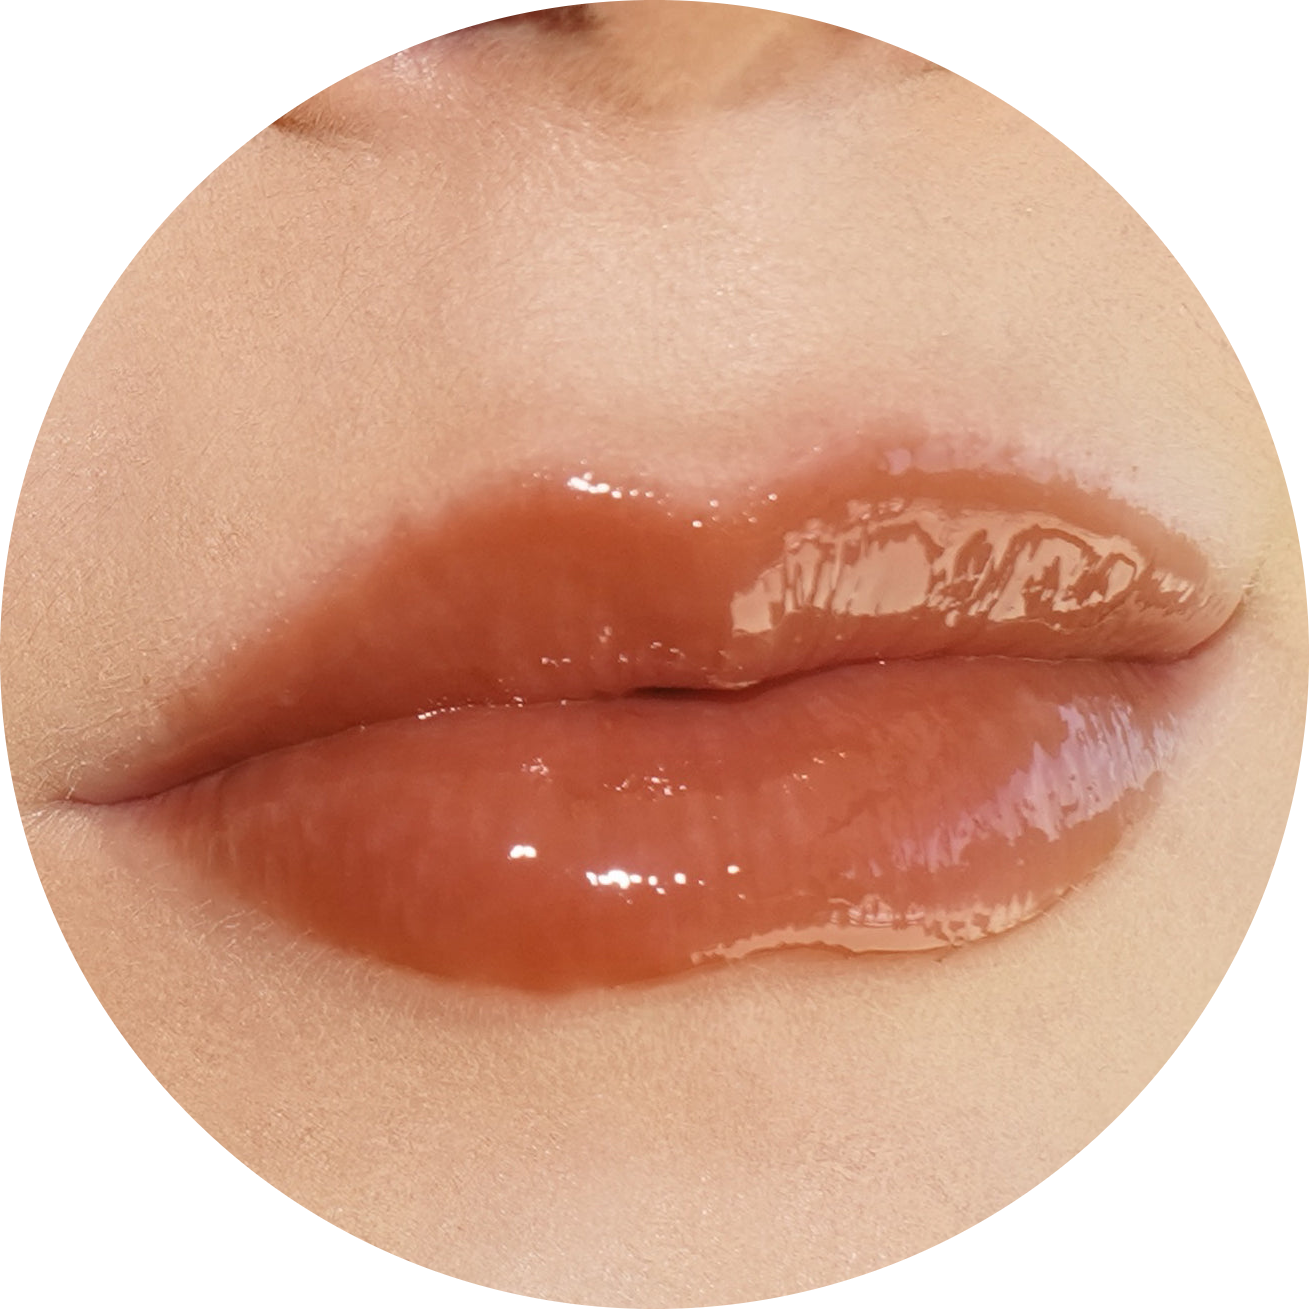 LIP OIL BALM CONDITIONING NudeFace Chile